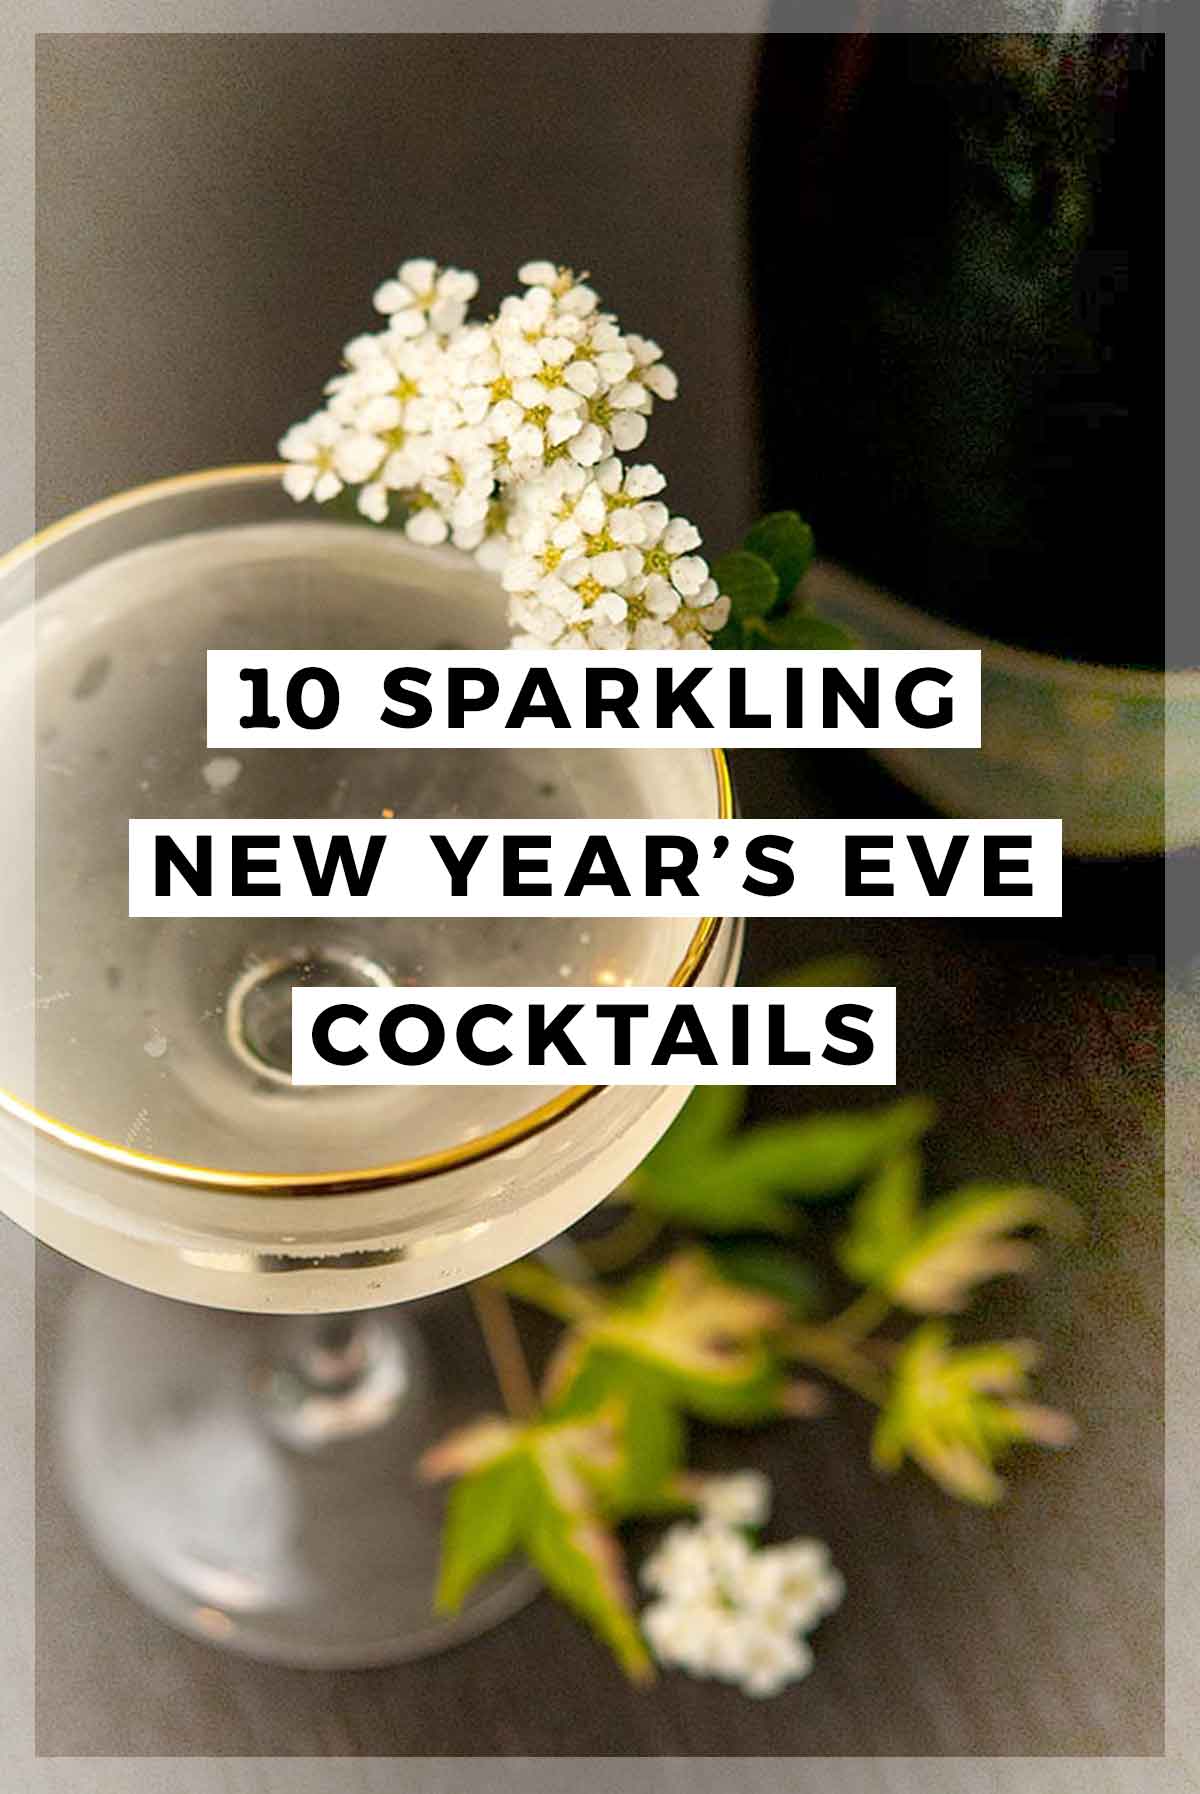 A flower-garnished cocktail with a title that says "10 Sparkling New Year's Even Cocktails."